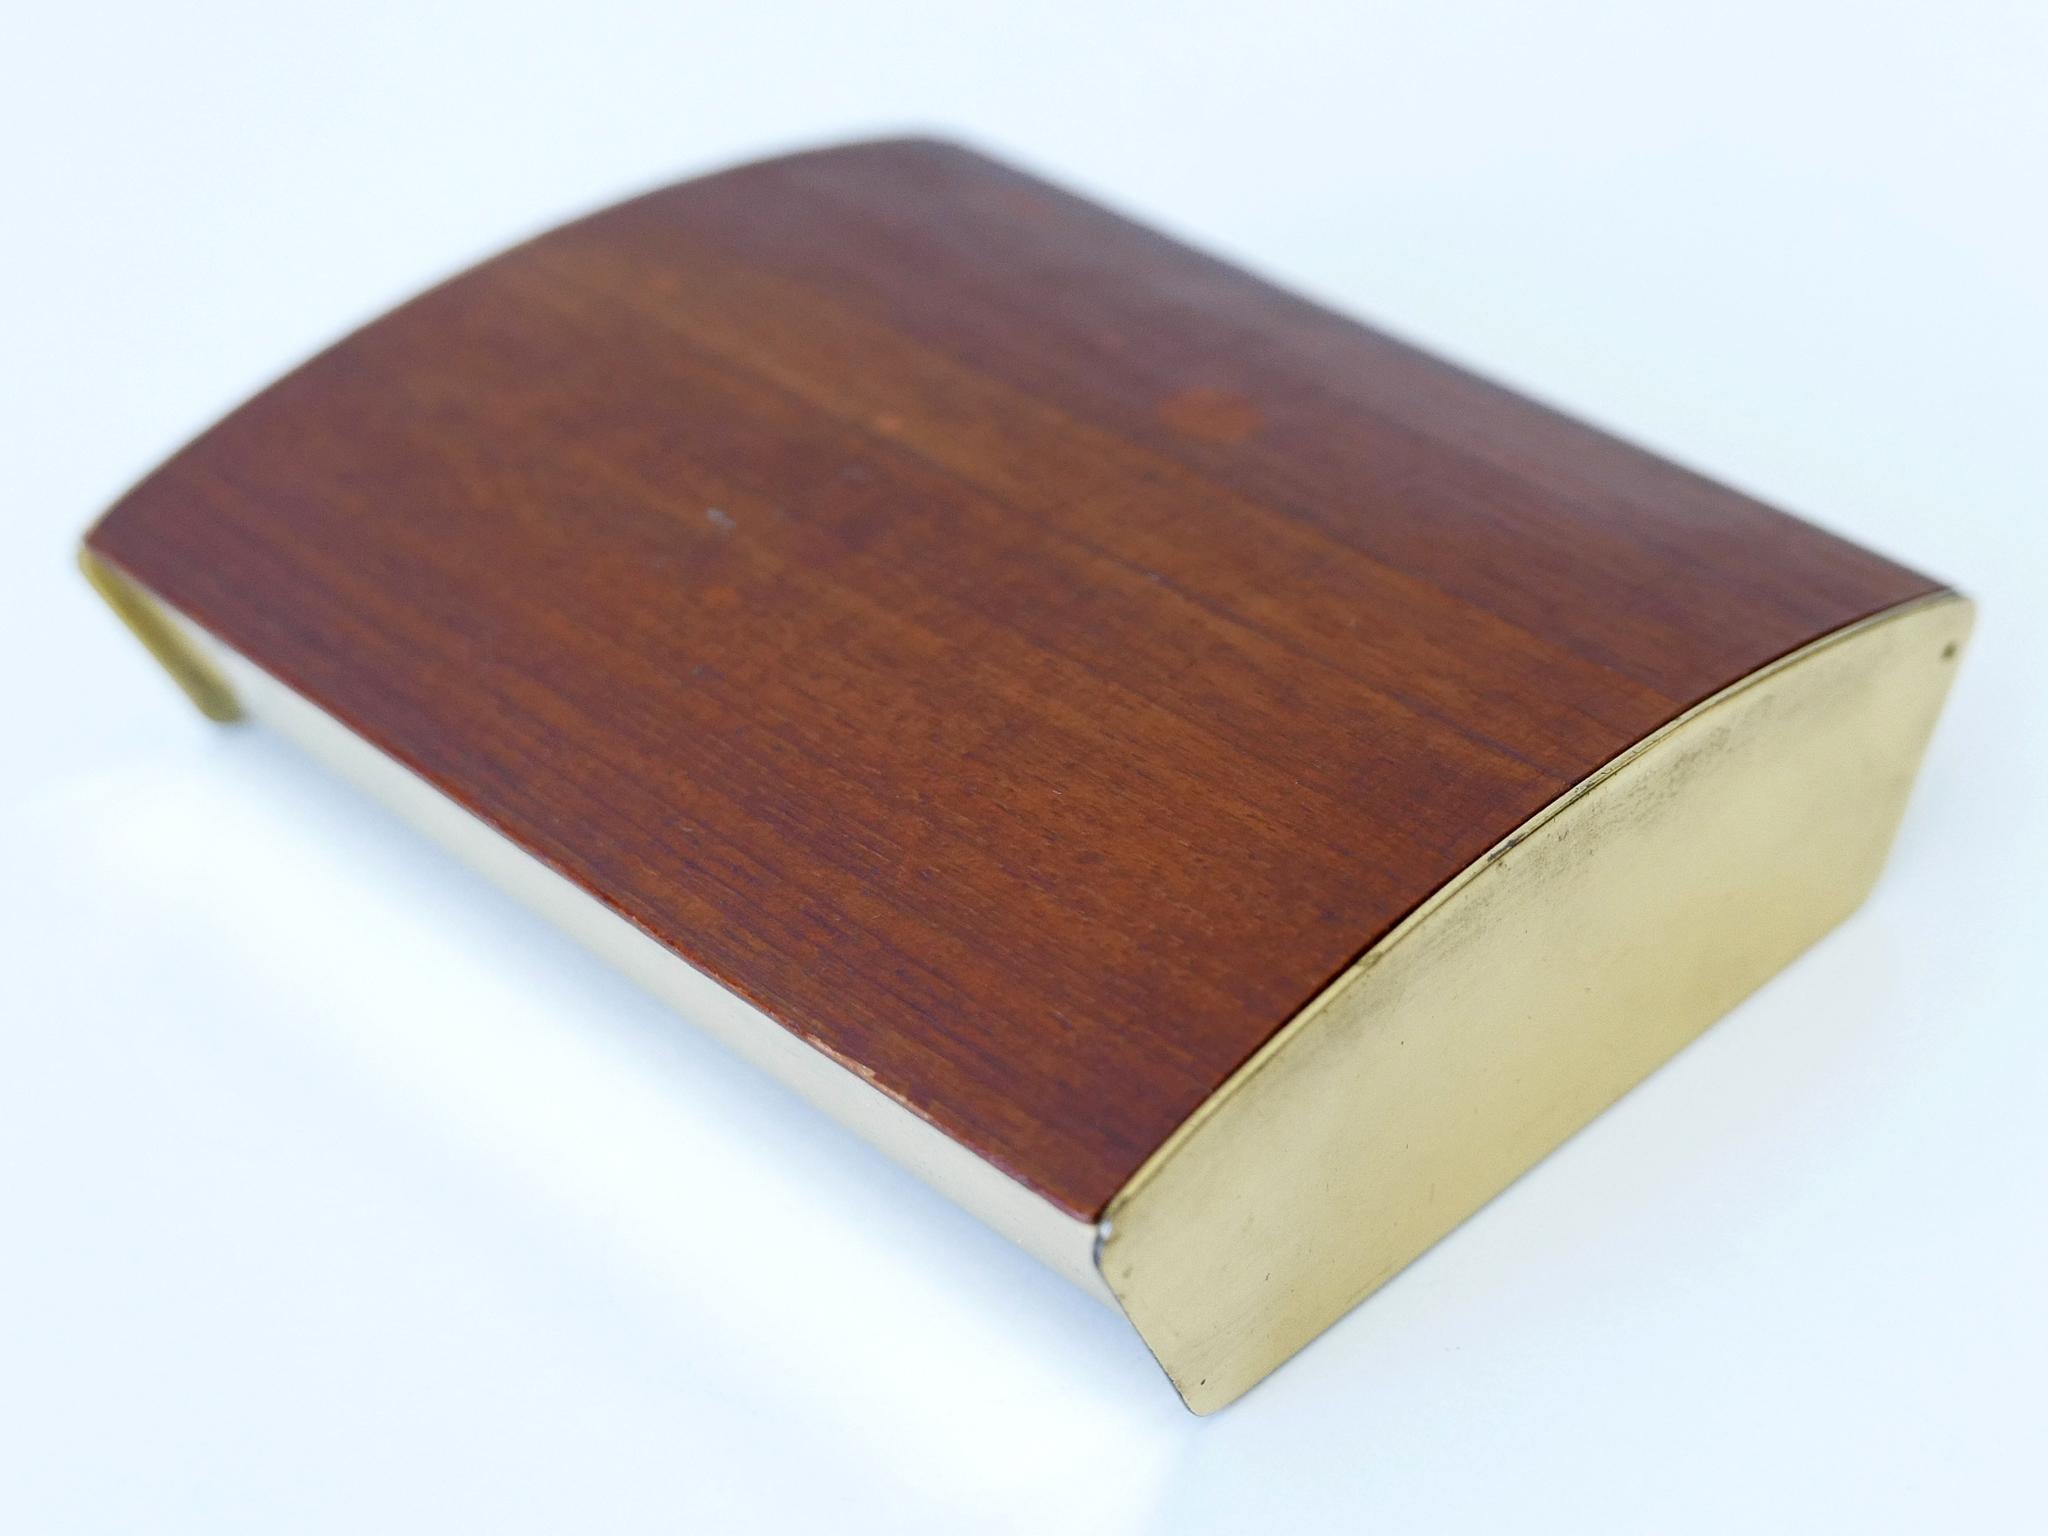 Extremely rare and elegant Mid-Century Modern cigar or cigarette box by Carl Auböck, Vienna, Austria, 1950s.

Executed in teak wood, cork and polished brass.

Dimensions: 
W 5.12 in. (13 cm)
D 4.33 in. (11 cm)
H 1.5 in. (3.8 cm)

Condition:
Good